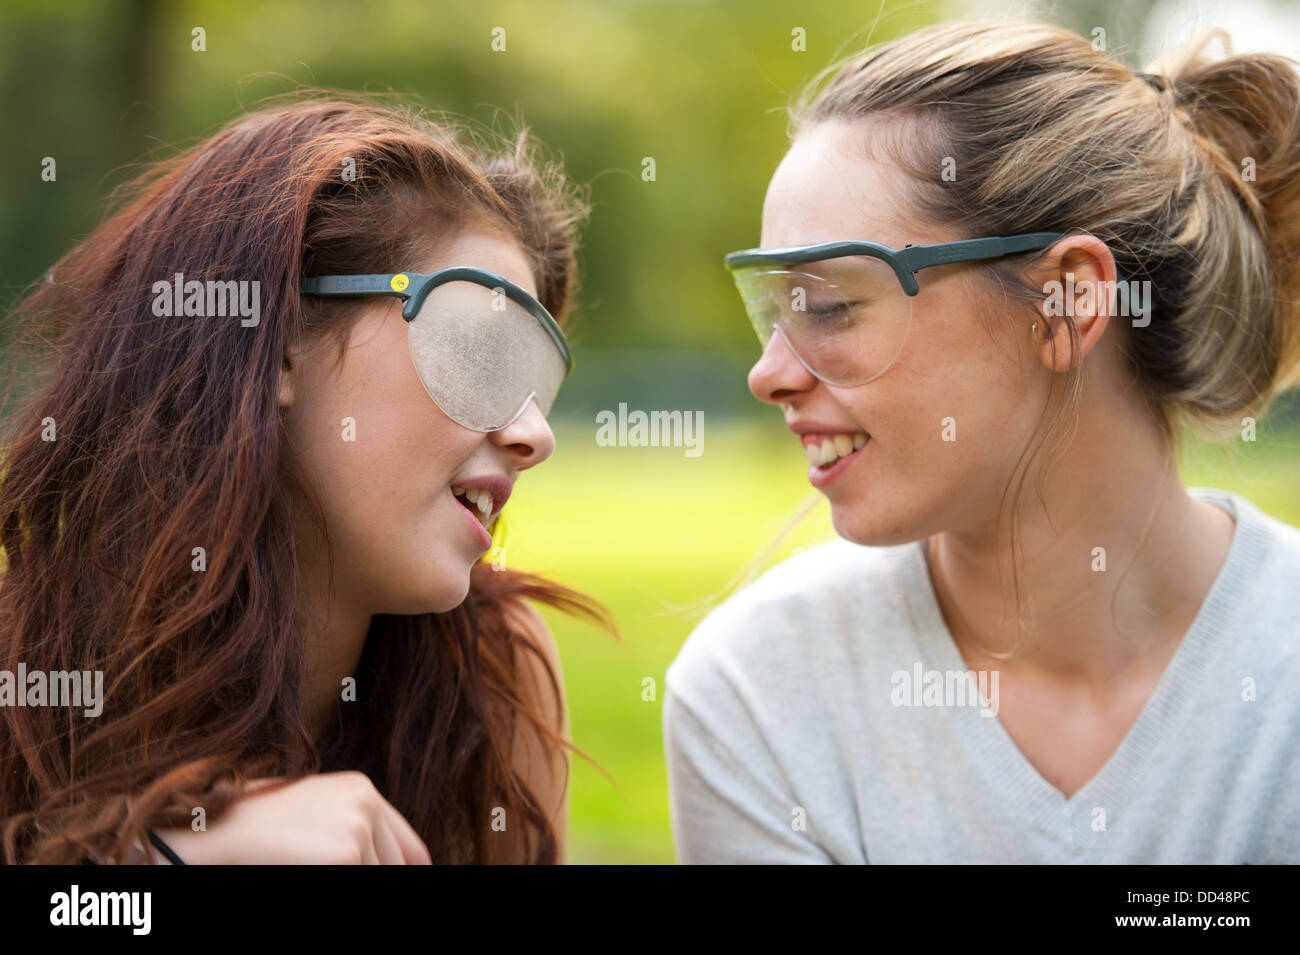 two young people wearing visual impairment simulation glasses Stock Photo